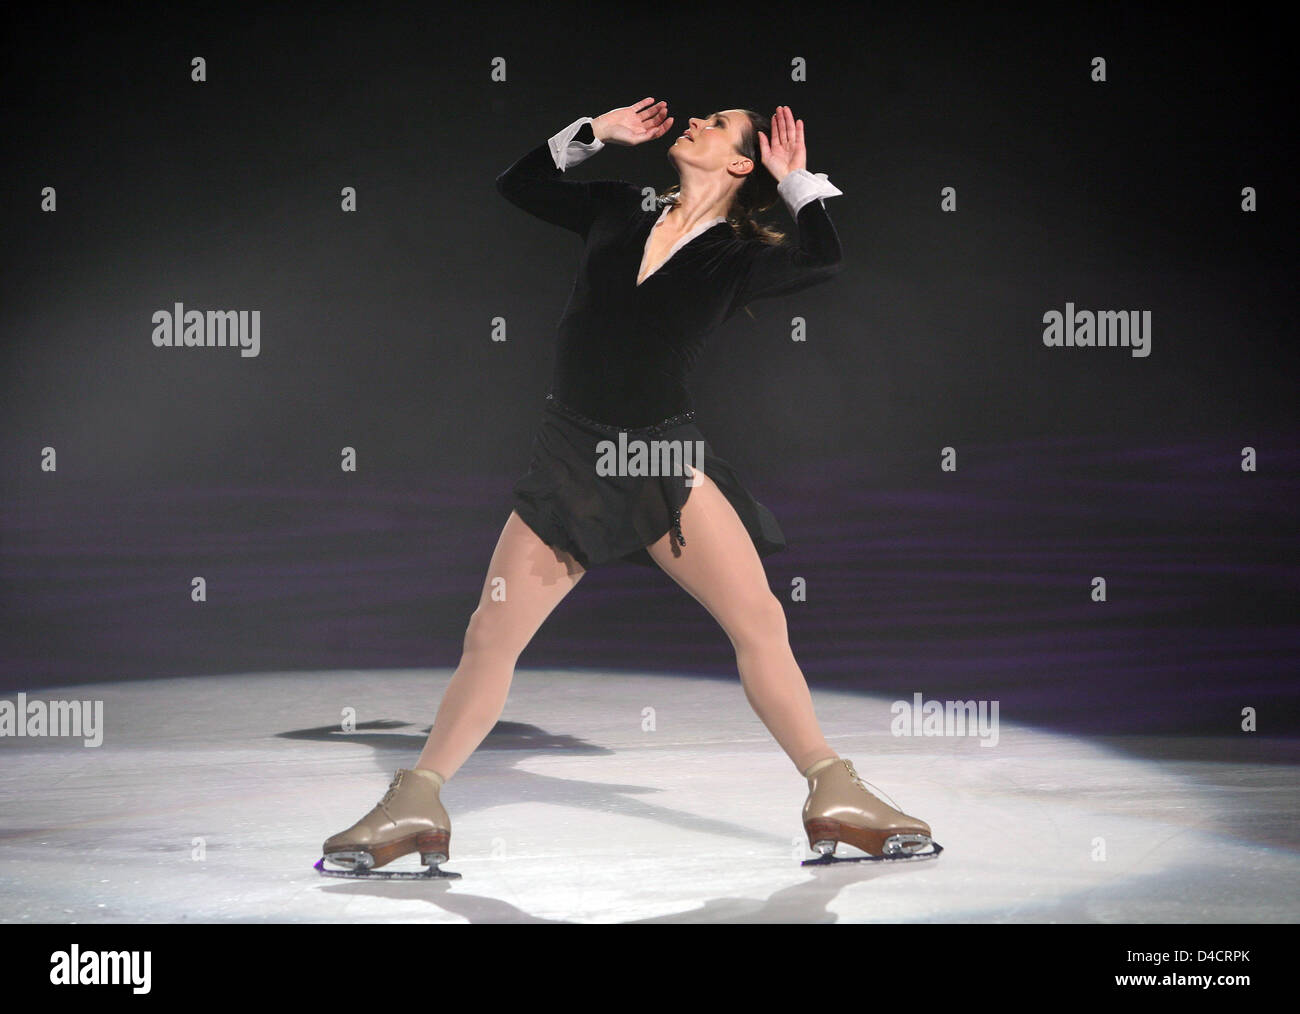 German figure skater Katarina Witt performs a free skate on her farewell tour stopping over in Berlin, Germany, 16 February 2008. The 42-year-old, who remains one of the most successful figure skaters of all time, will give a retrospect on her decades-long career including numerous World and Olympic title, most of them claimed in the 1980s. Photo: STEPHANIE PILICK Stock Photo